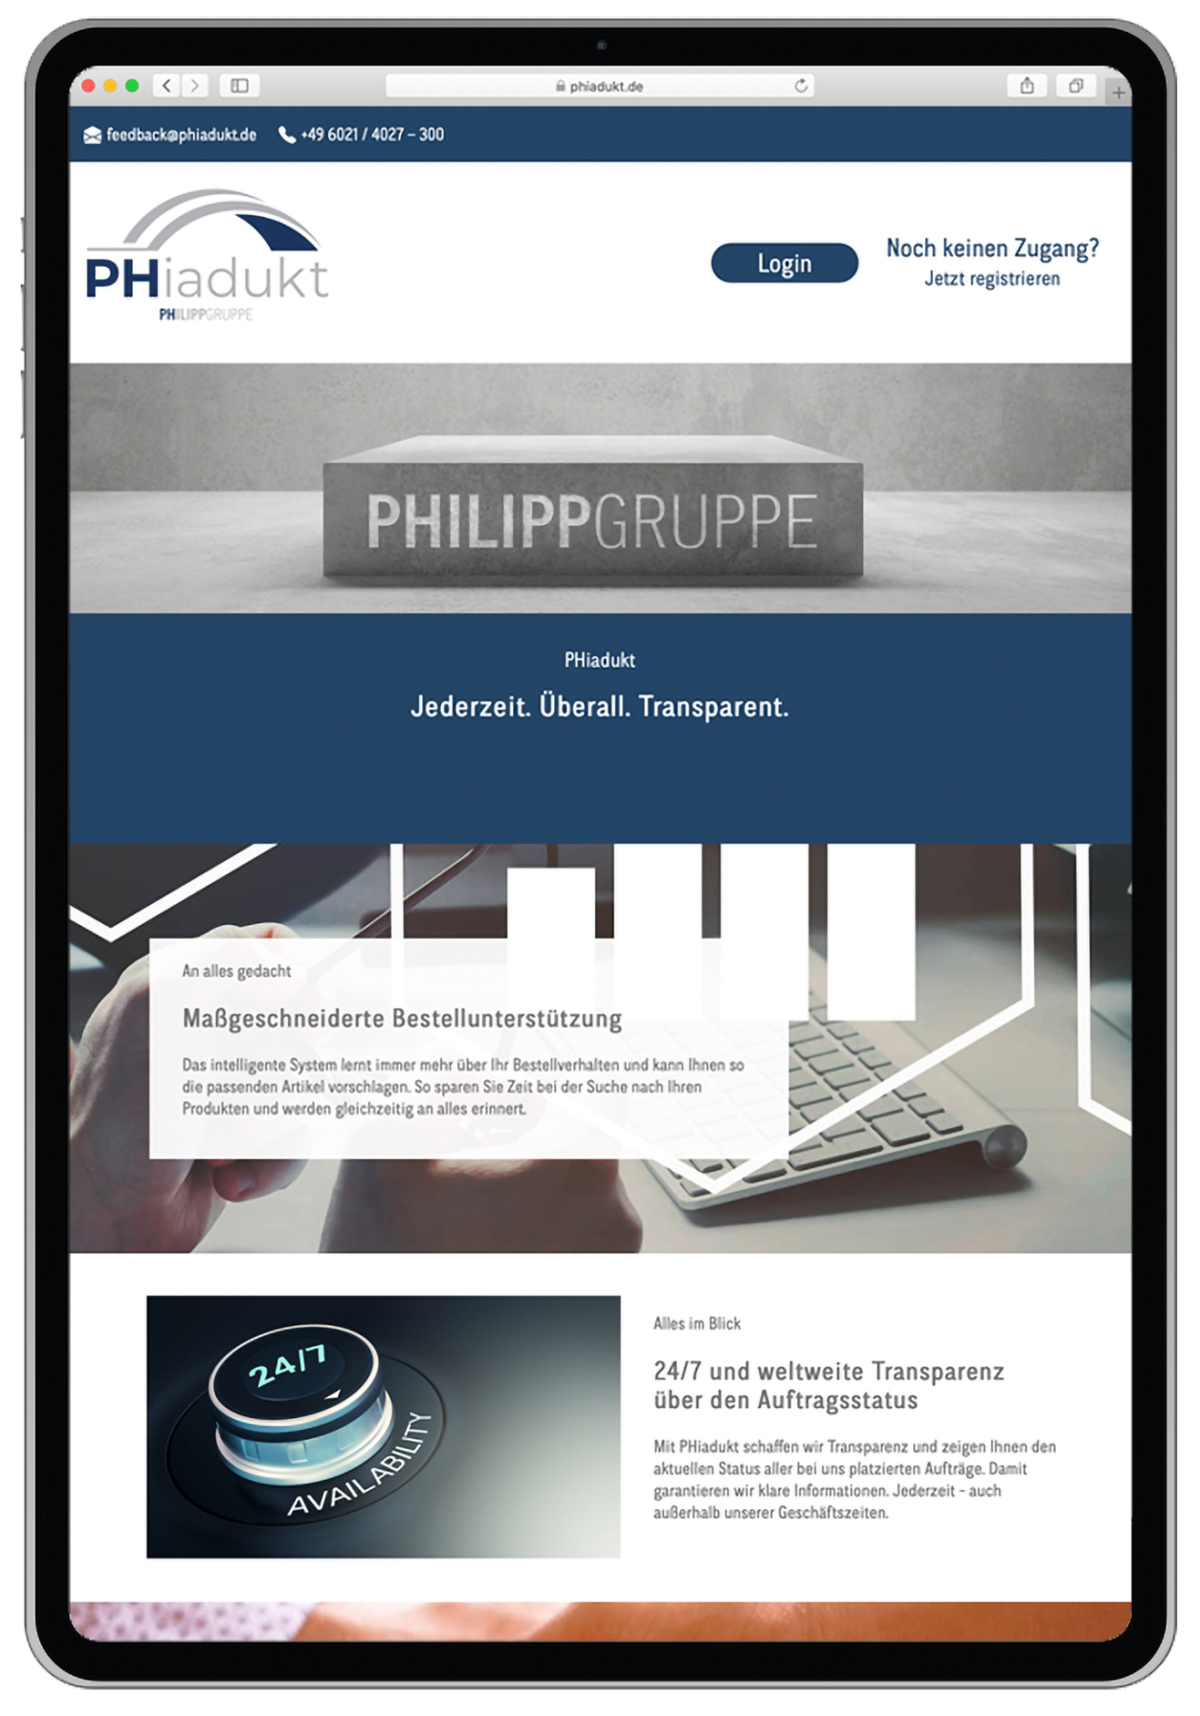 Service portal connects the Philipp Group with its partners - Concrete ...